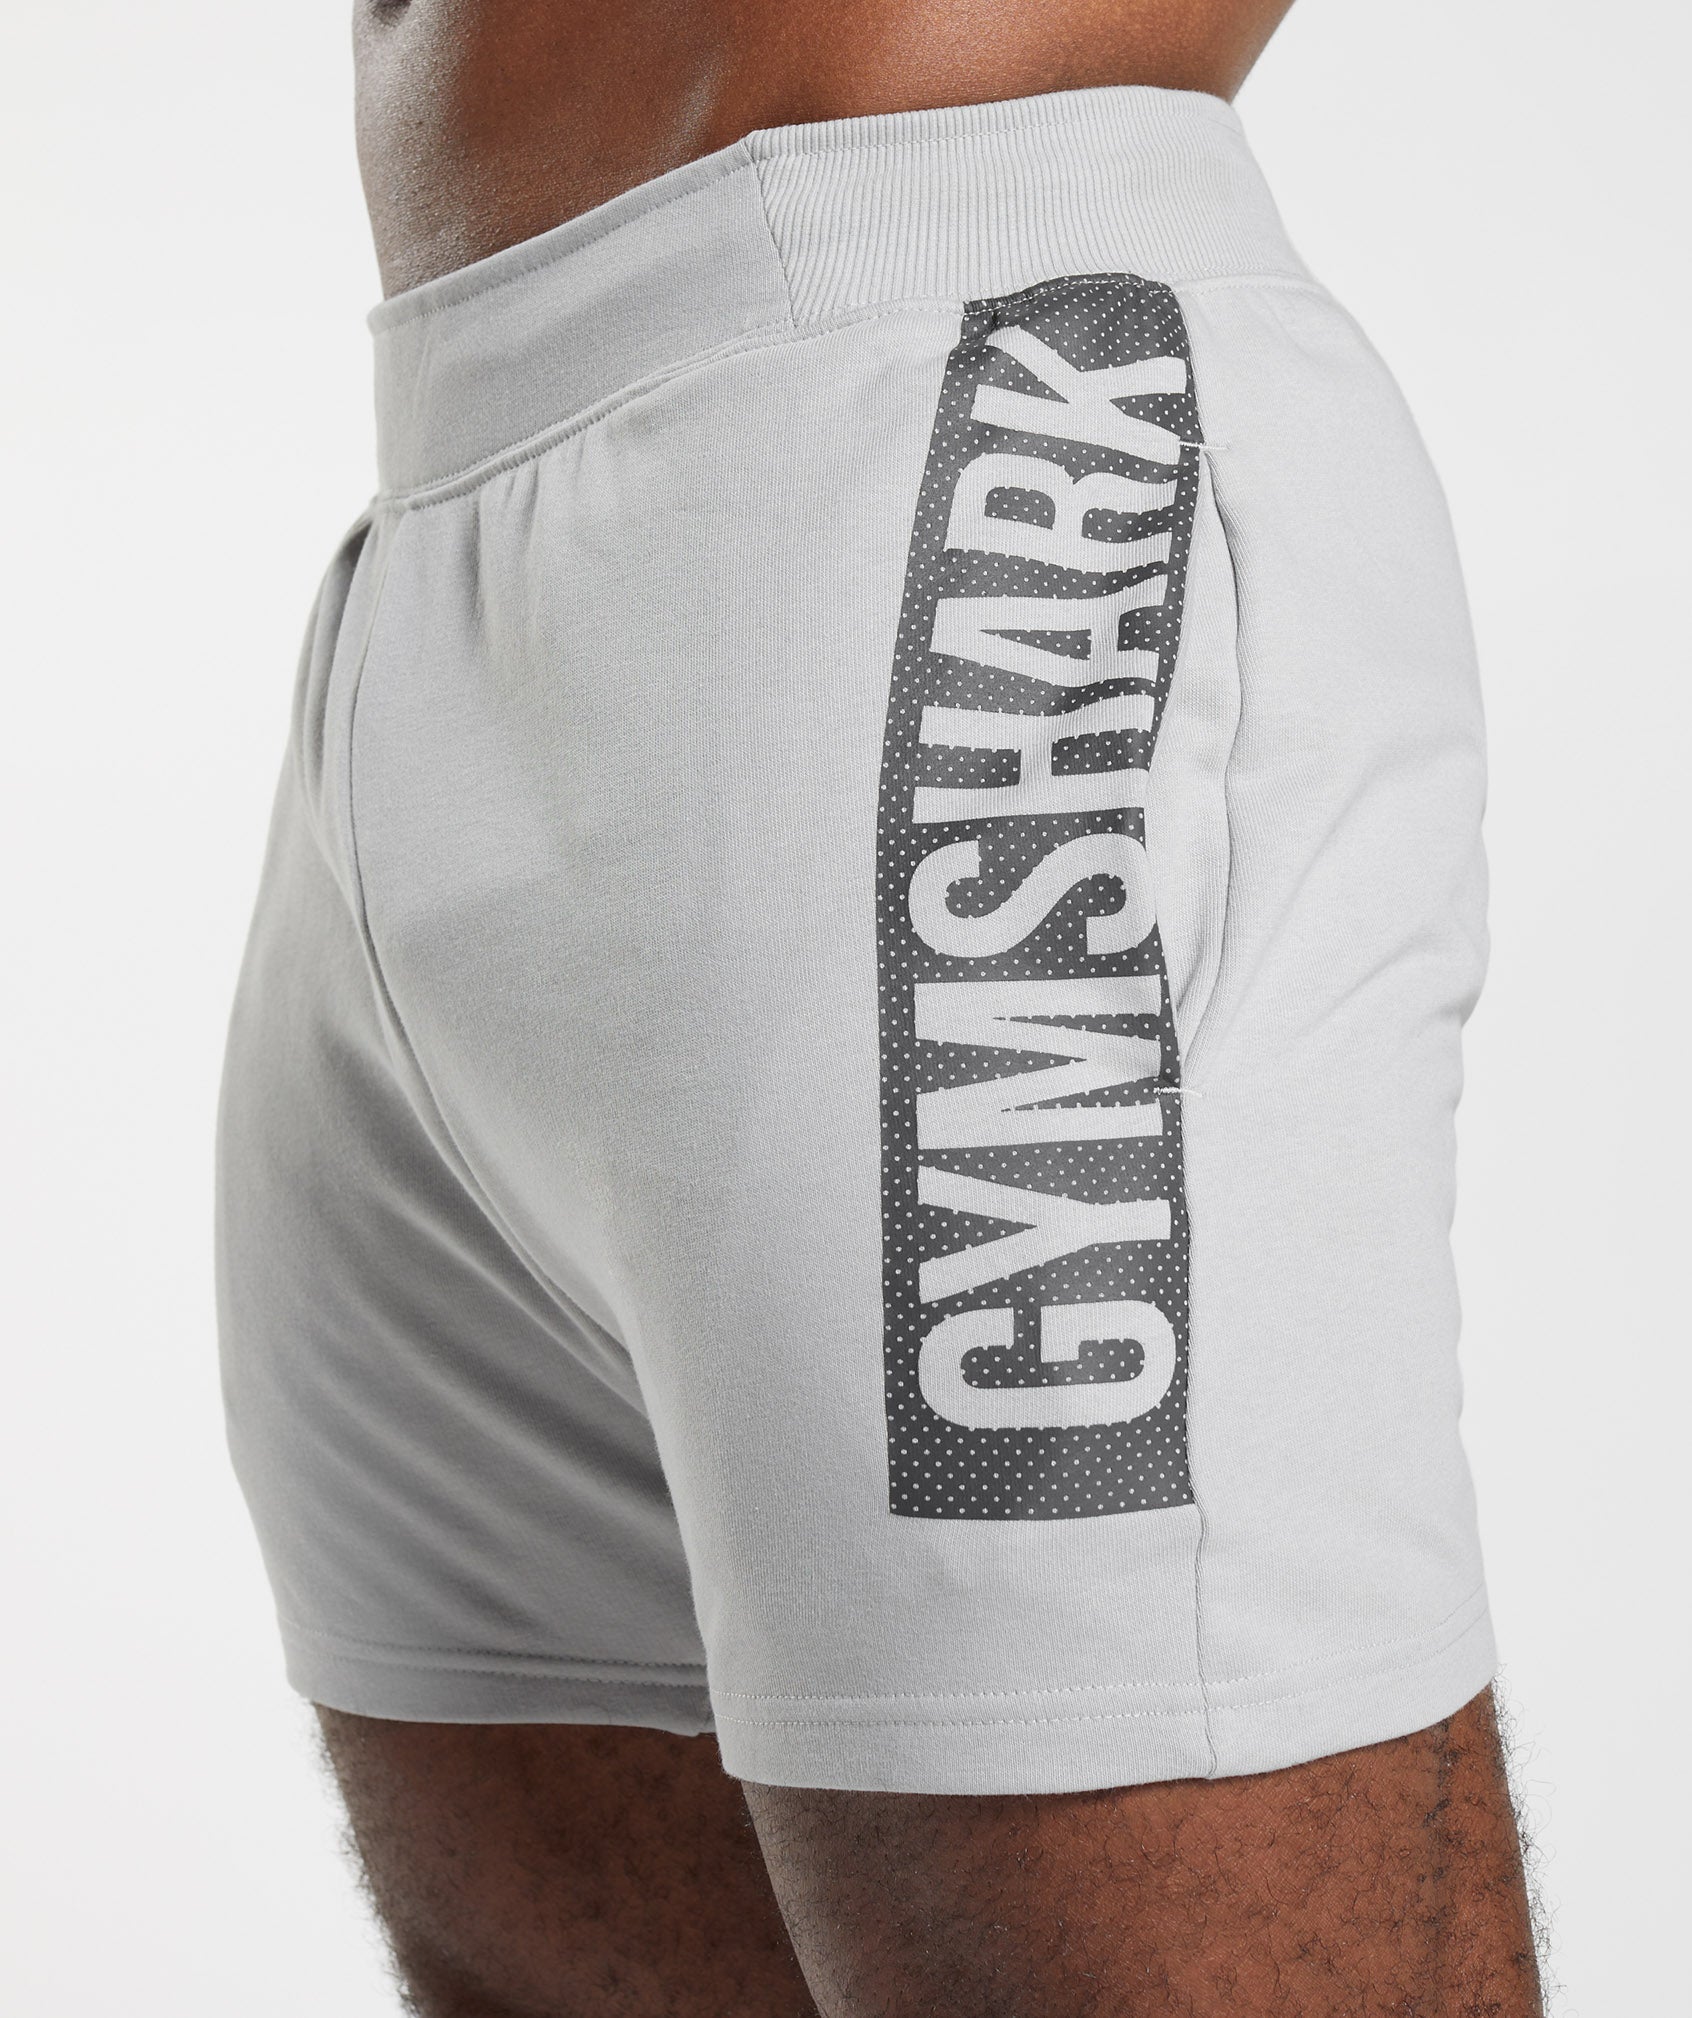 Bold Shorts in Light Grey - view 5